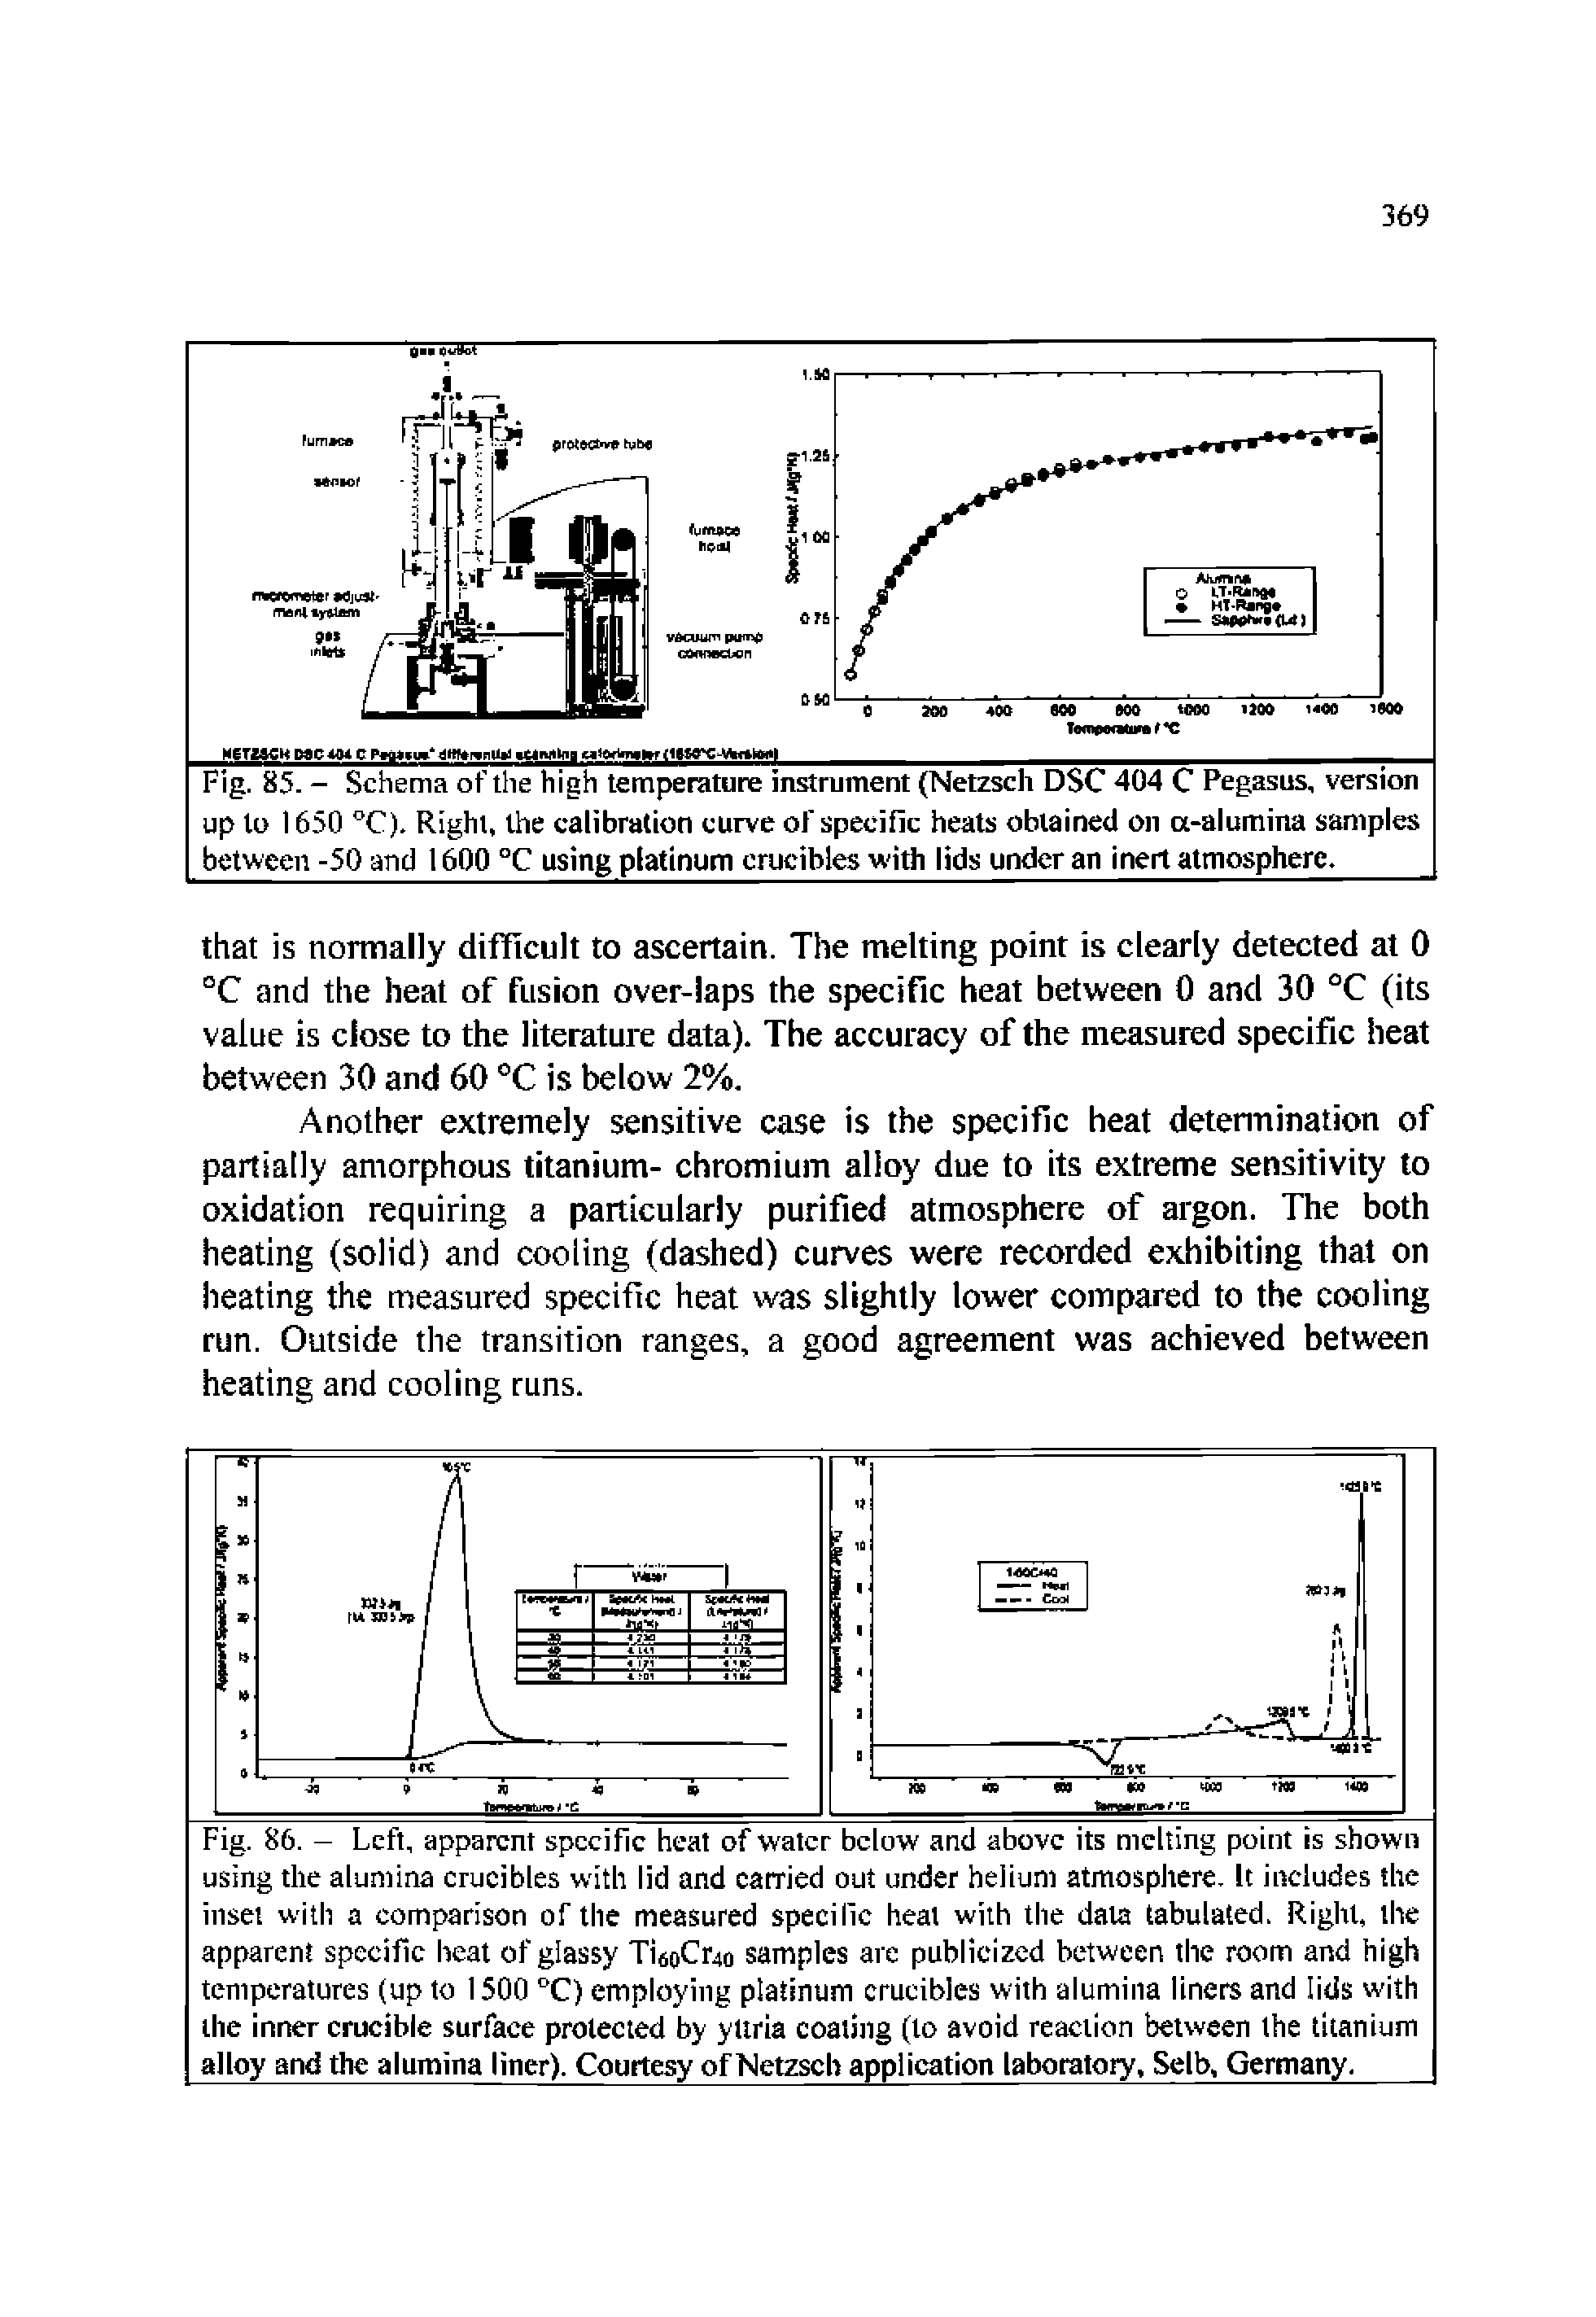 Fig. 86. - Left, apparent specific heat of water below and above its melting point is shown using the alumina crucibles with lid and carried out under helium atmosphere. It includes the inset with a comparison of the measured specific heat with the data tabulated. Right, the apparent specific heat of glassy Ti6oCr4o samples arc publicized between the room and high temperatures (up to 1500 C) employing platinum crucibles with alumina liners and lids with the inner crucible surface protected by yltria coating (to avoid reaction between the titanium alloy and the alumina liner). Courtesy of Netzsch application laboratory, Selb, Germany.